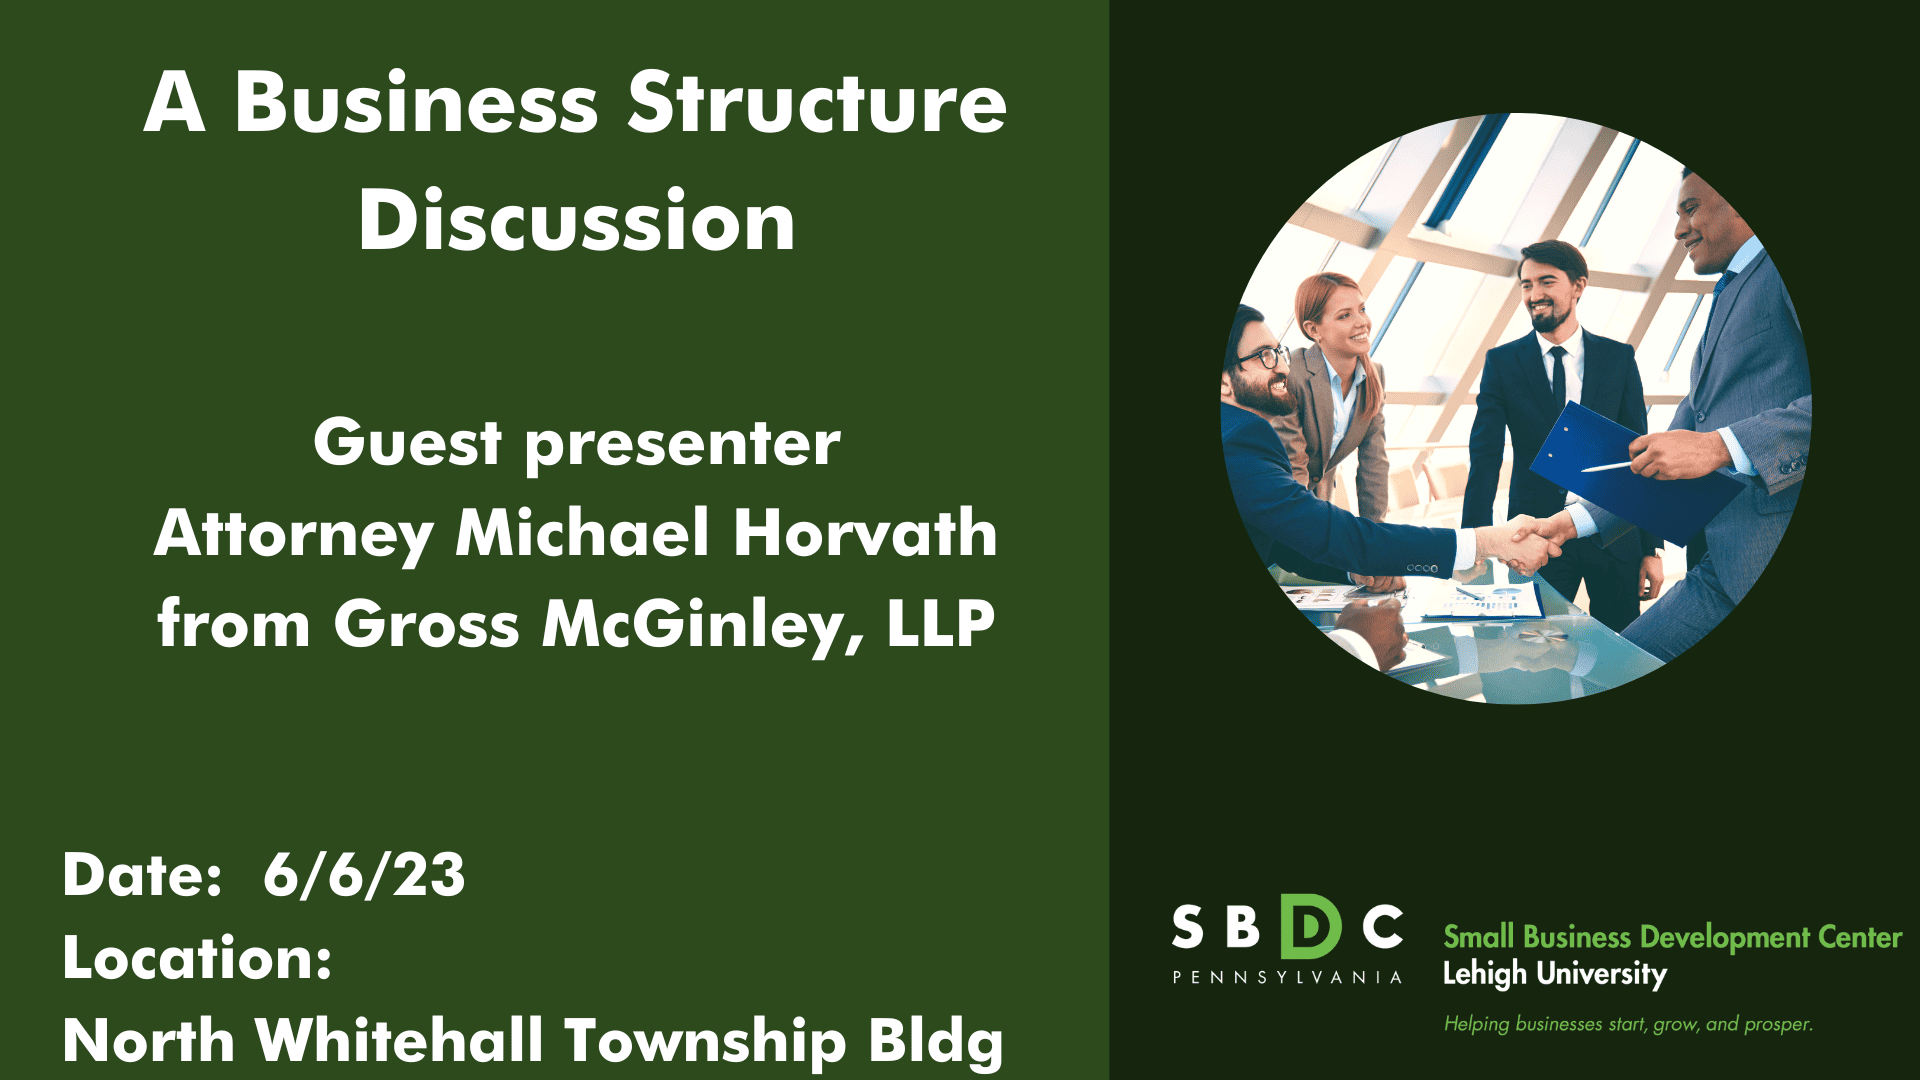 A Business Structure Discussion